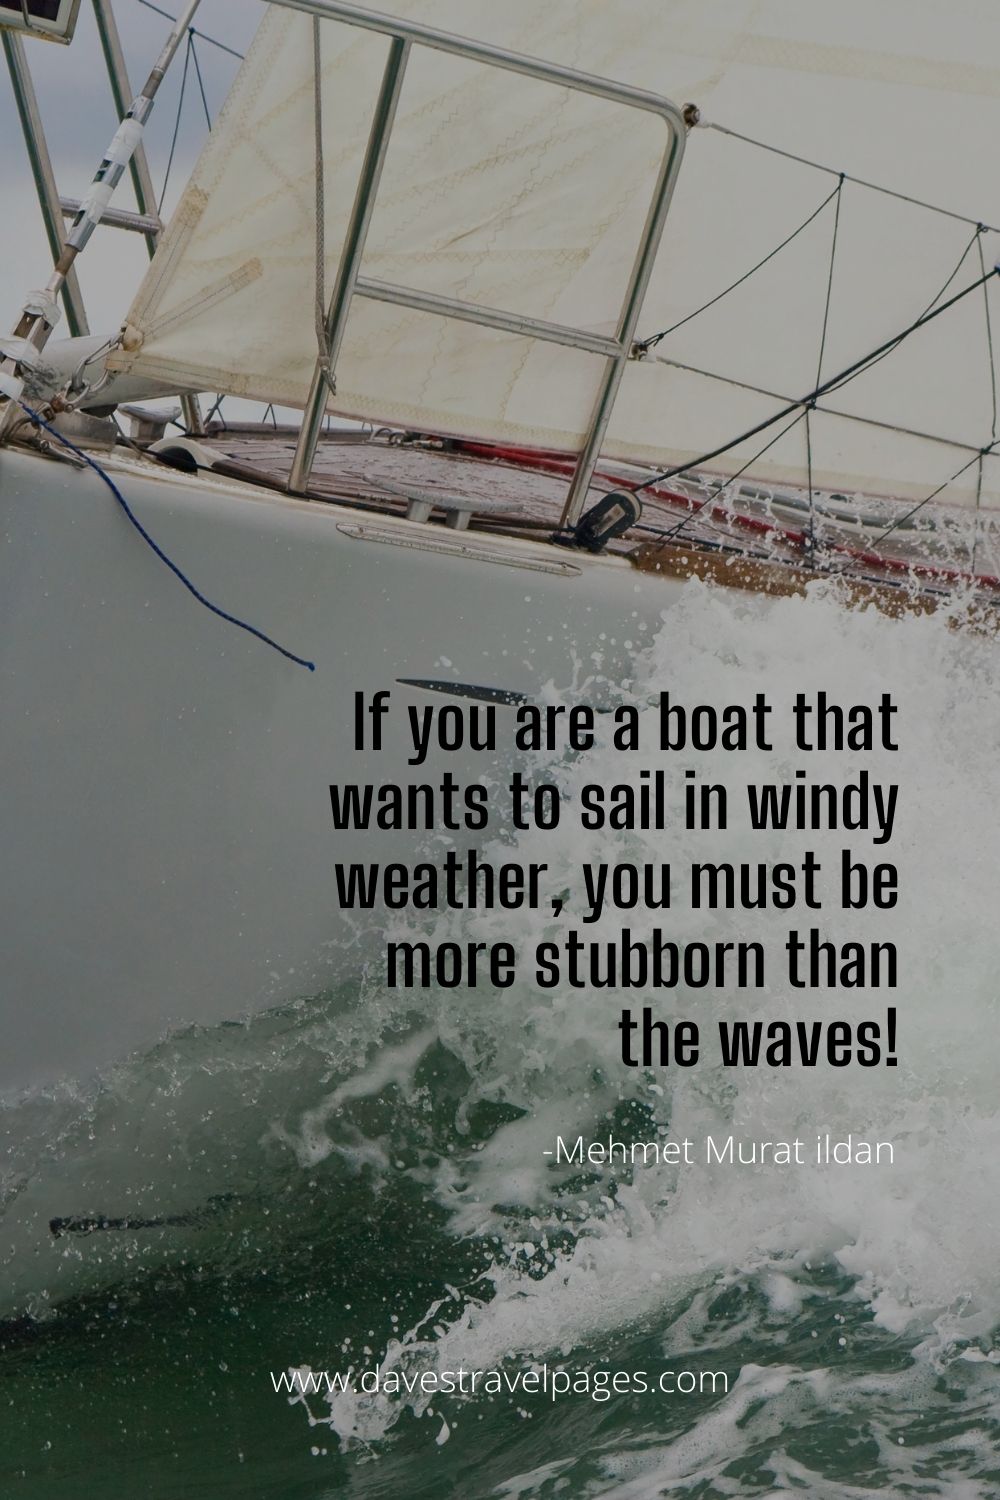 If you are a boat that wants to sail in windy weather, you must be more stubborn than the waves!